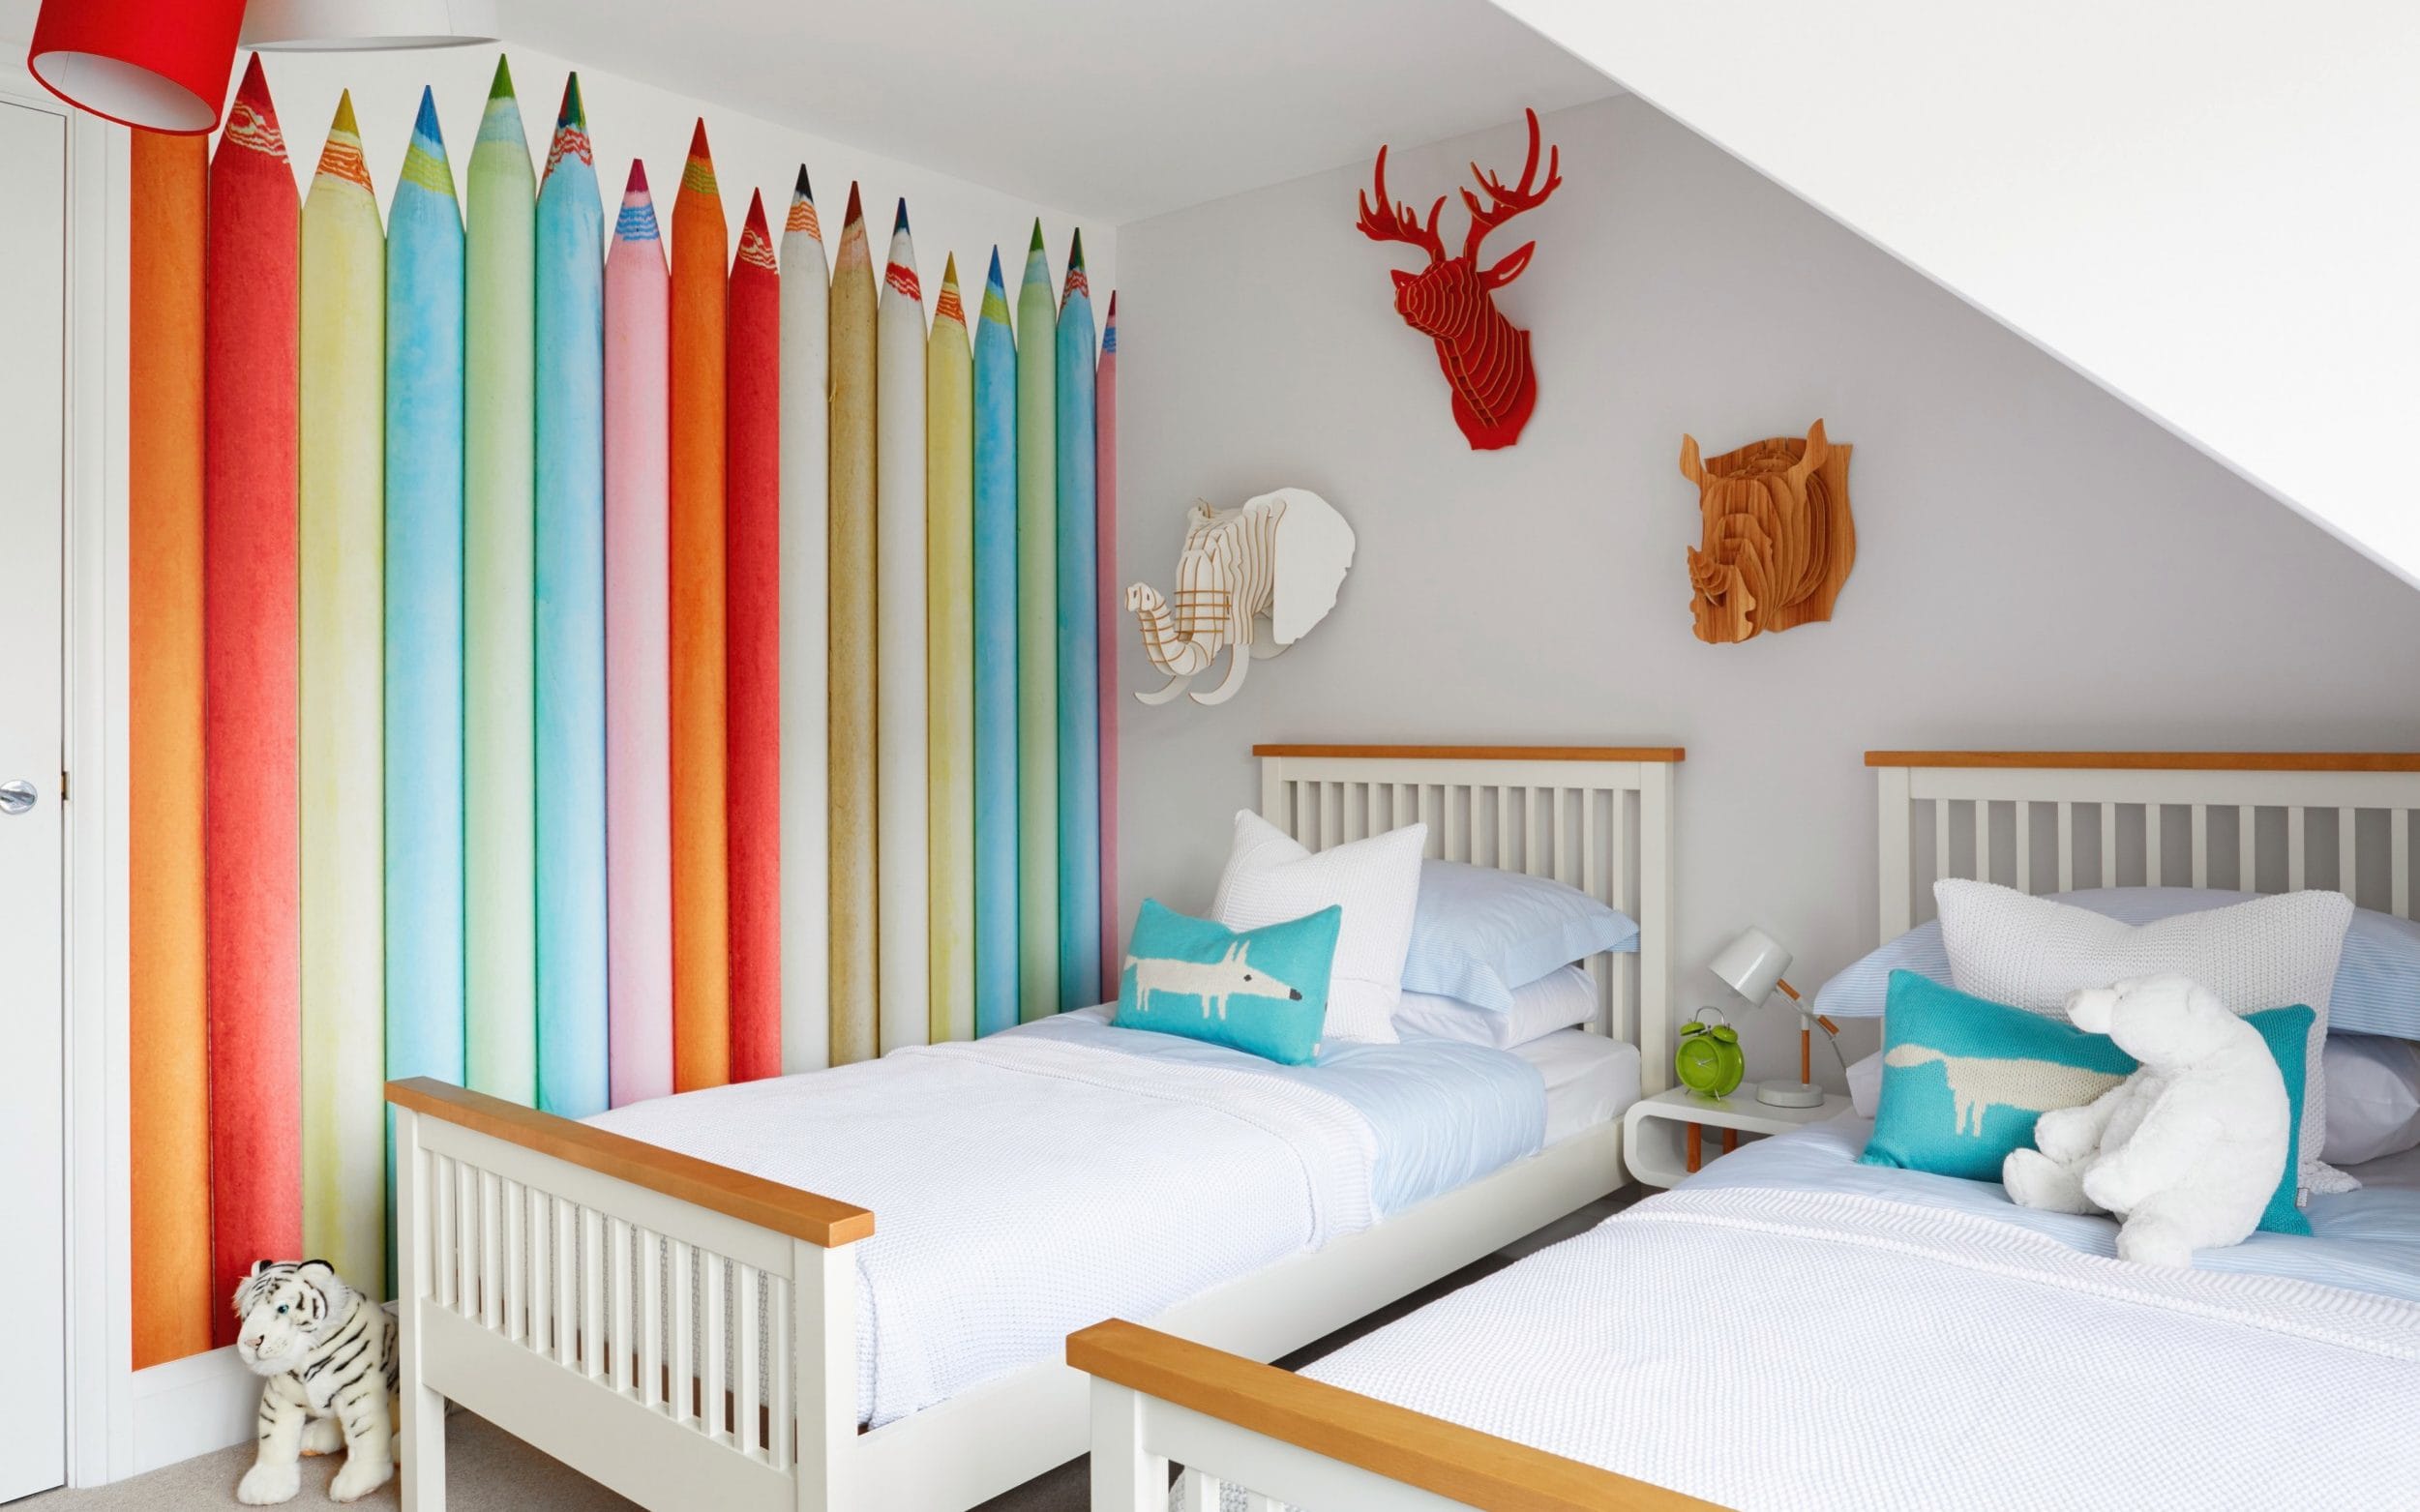 Putting the fun into functional: how to decorate your children's